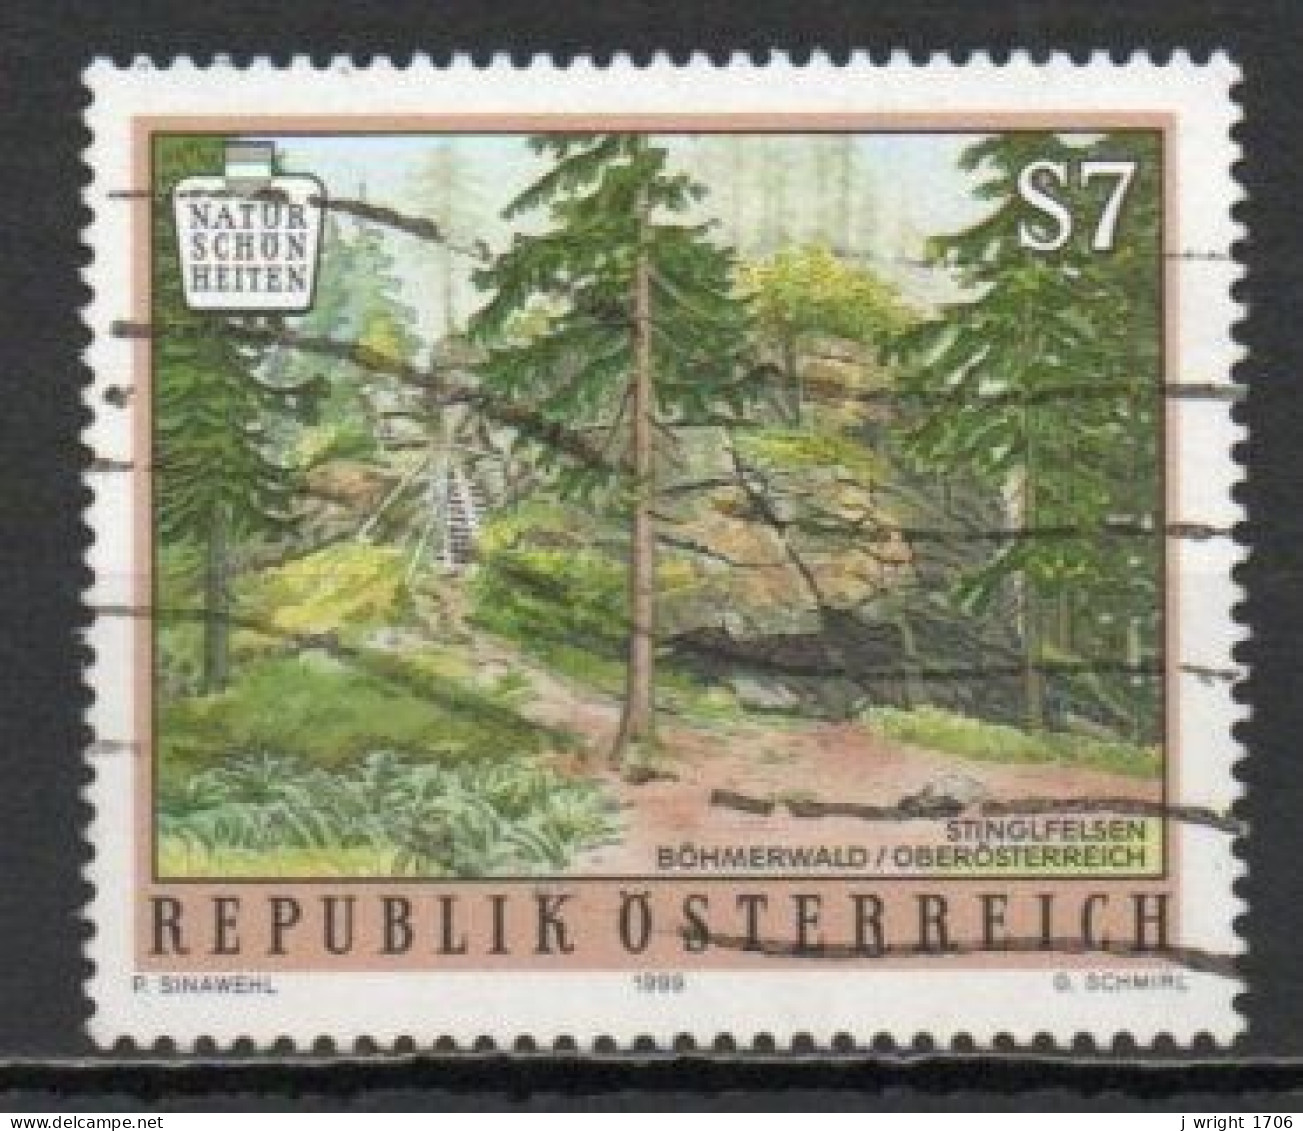 Austria, 1999, Austrian Natural Beauty/Stinglfelsen, 7s, USED - Used Stamps